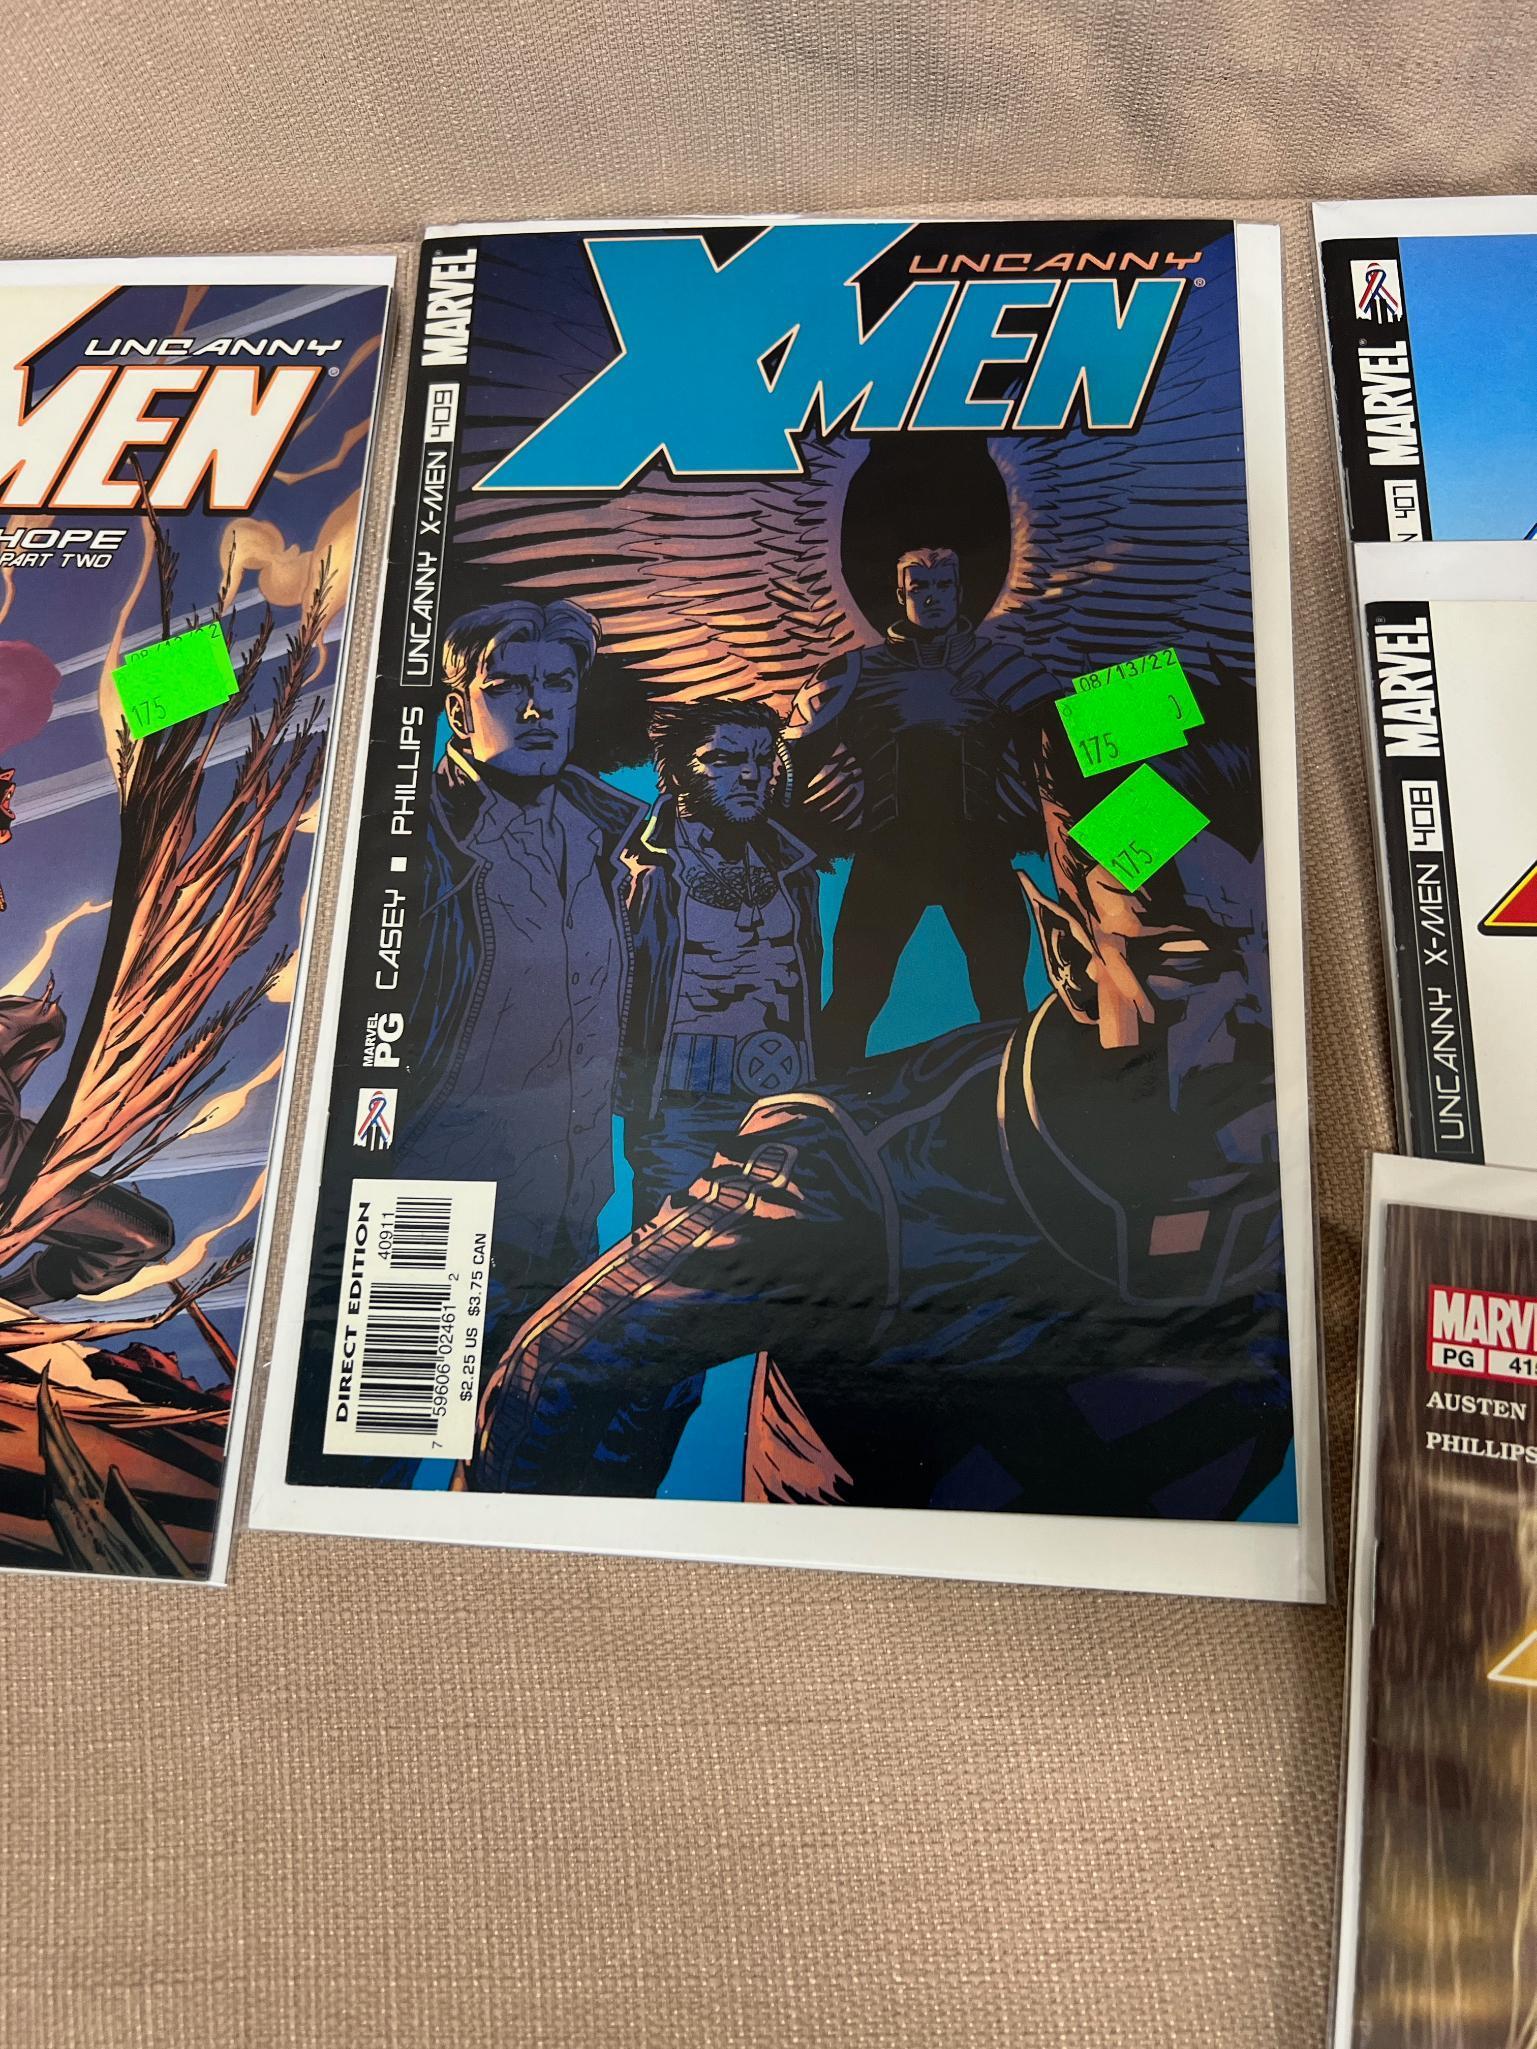 20+ Uncanny X-Men and related Comic Books issues 401-416, some dups, some gaps, see pics